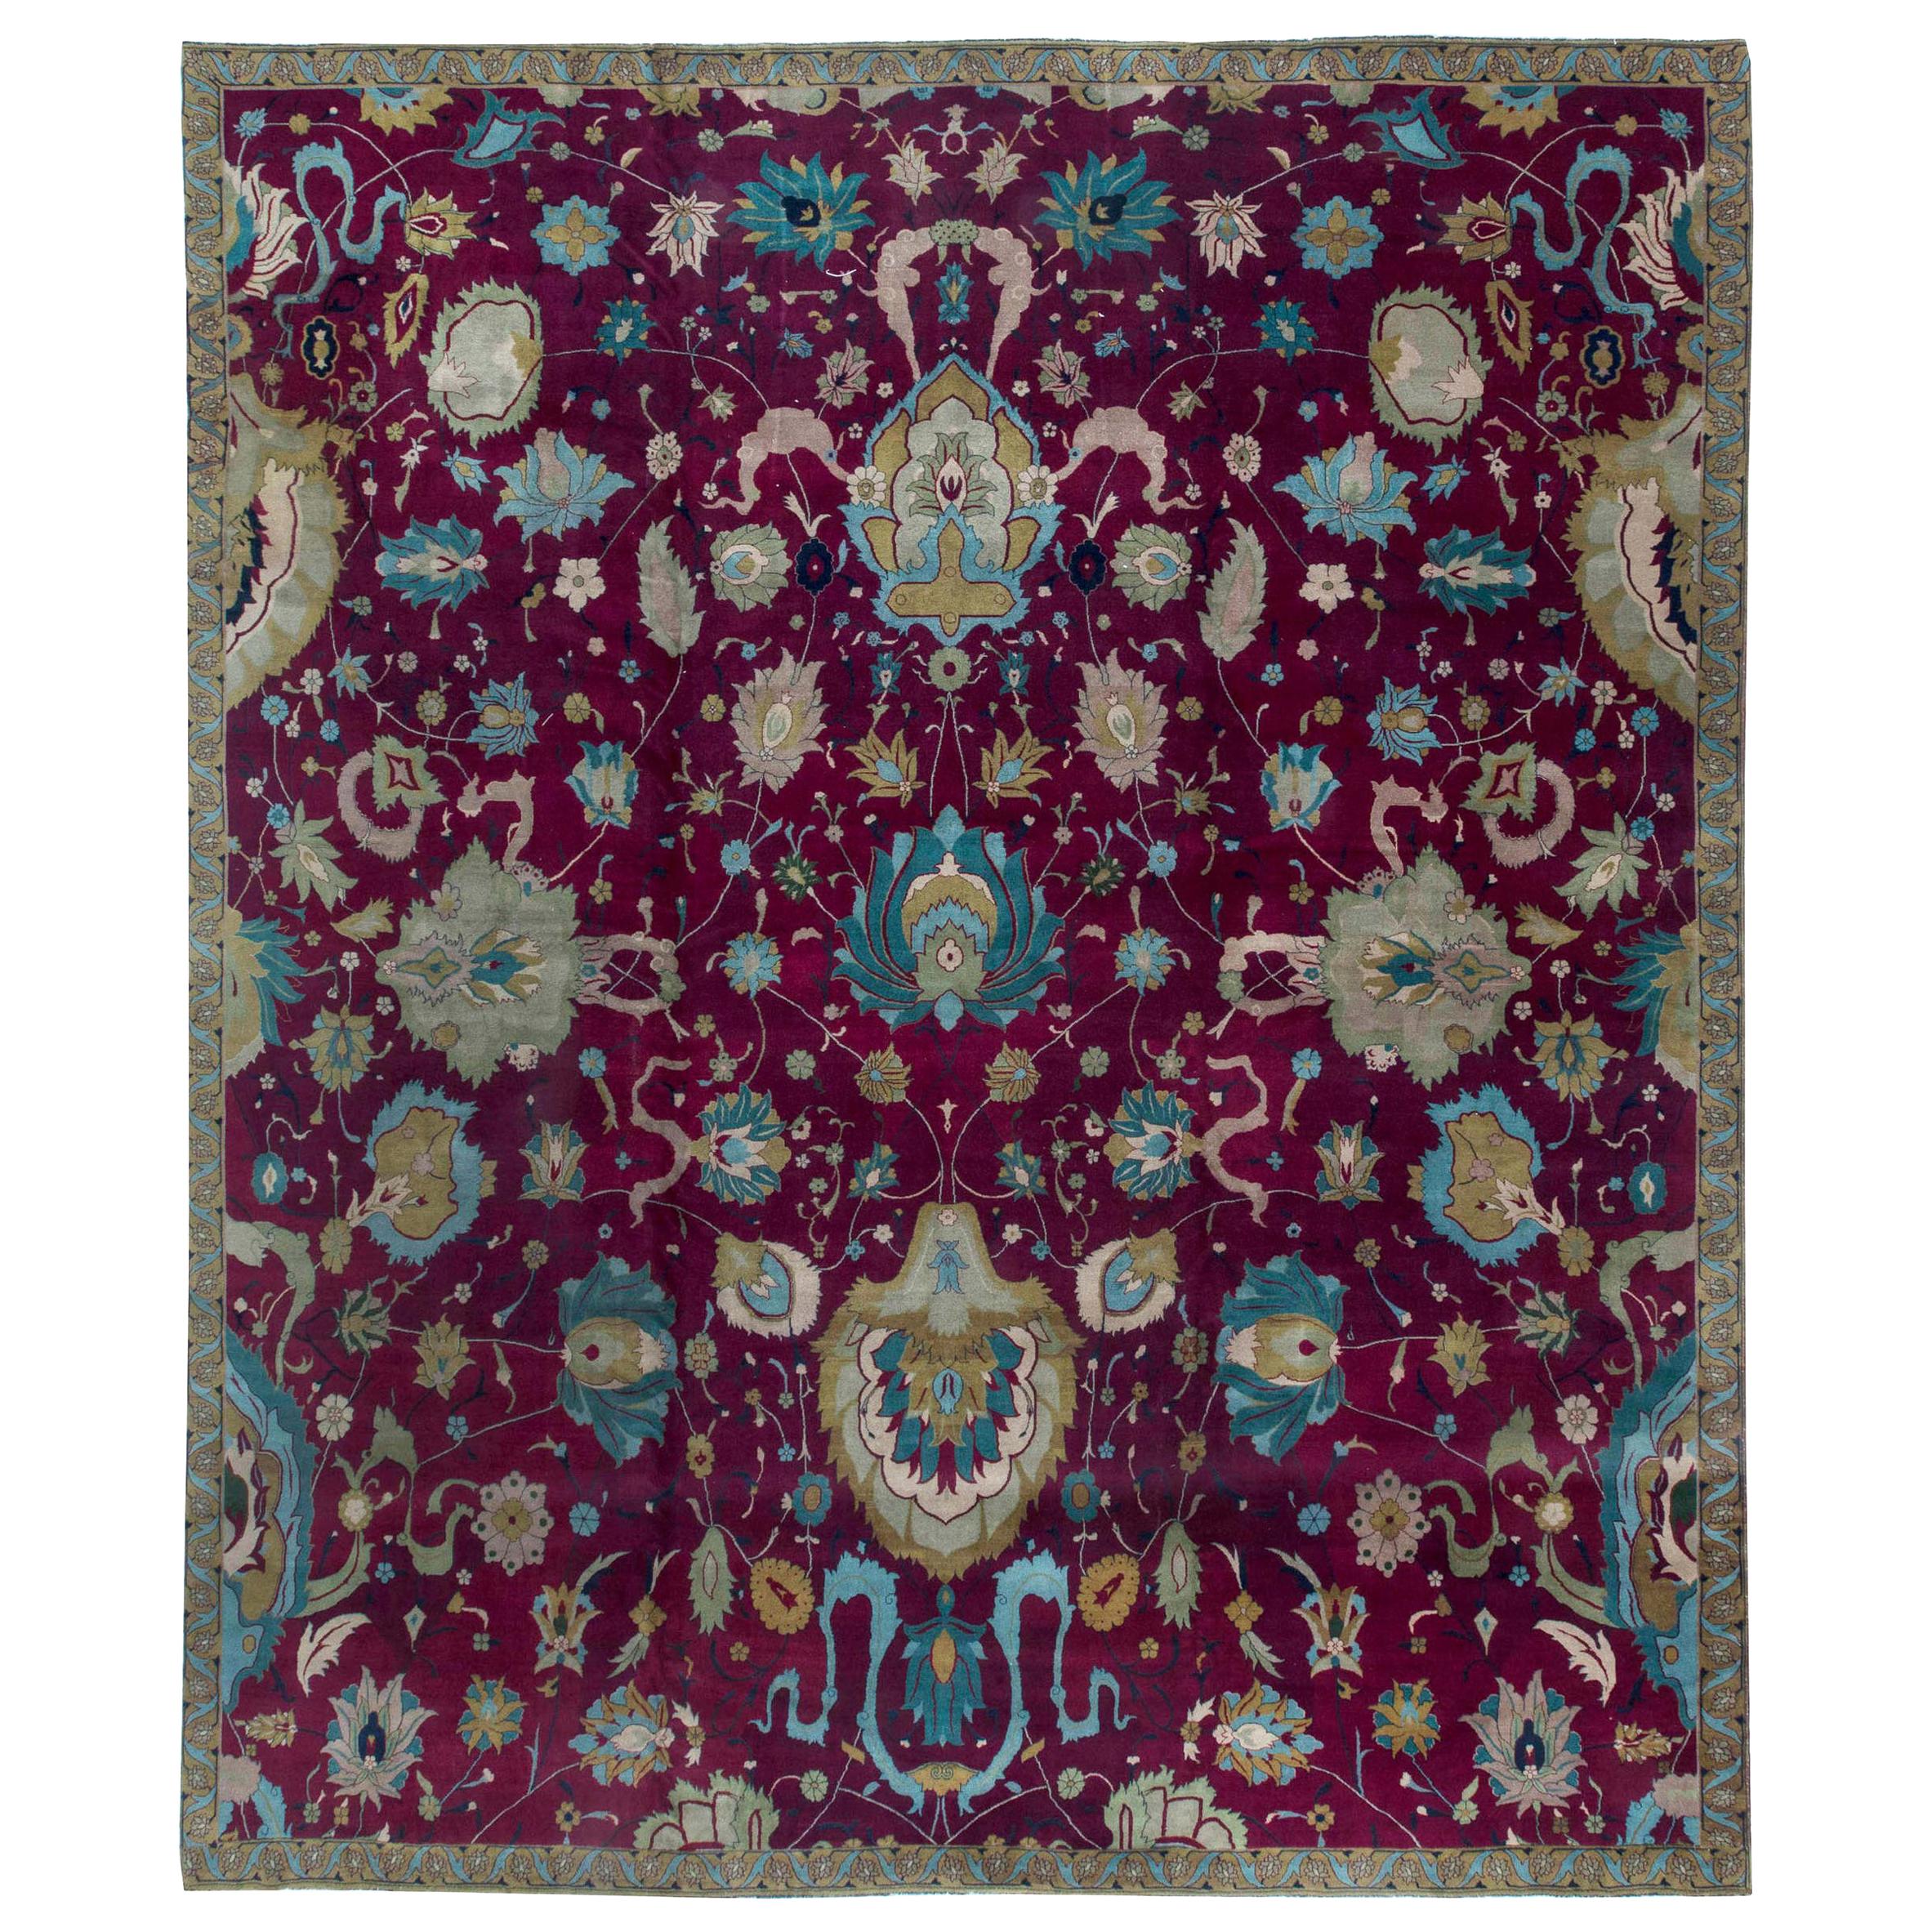 Early 20th Century Purple Floral Indian Handmade Wool Rug